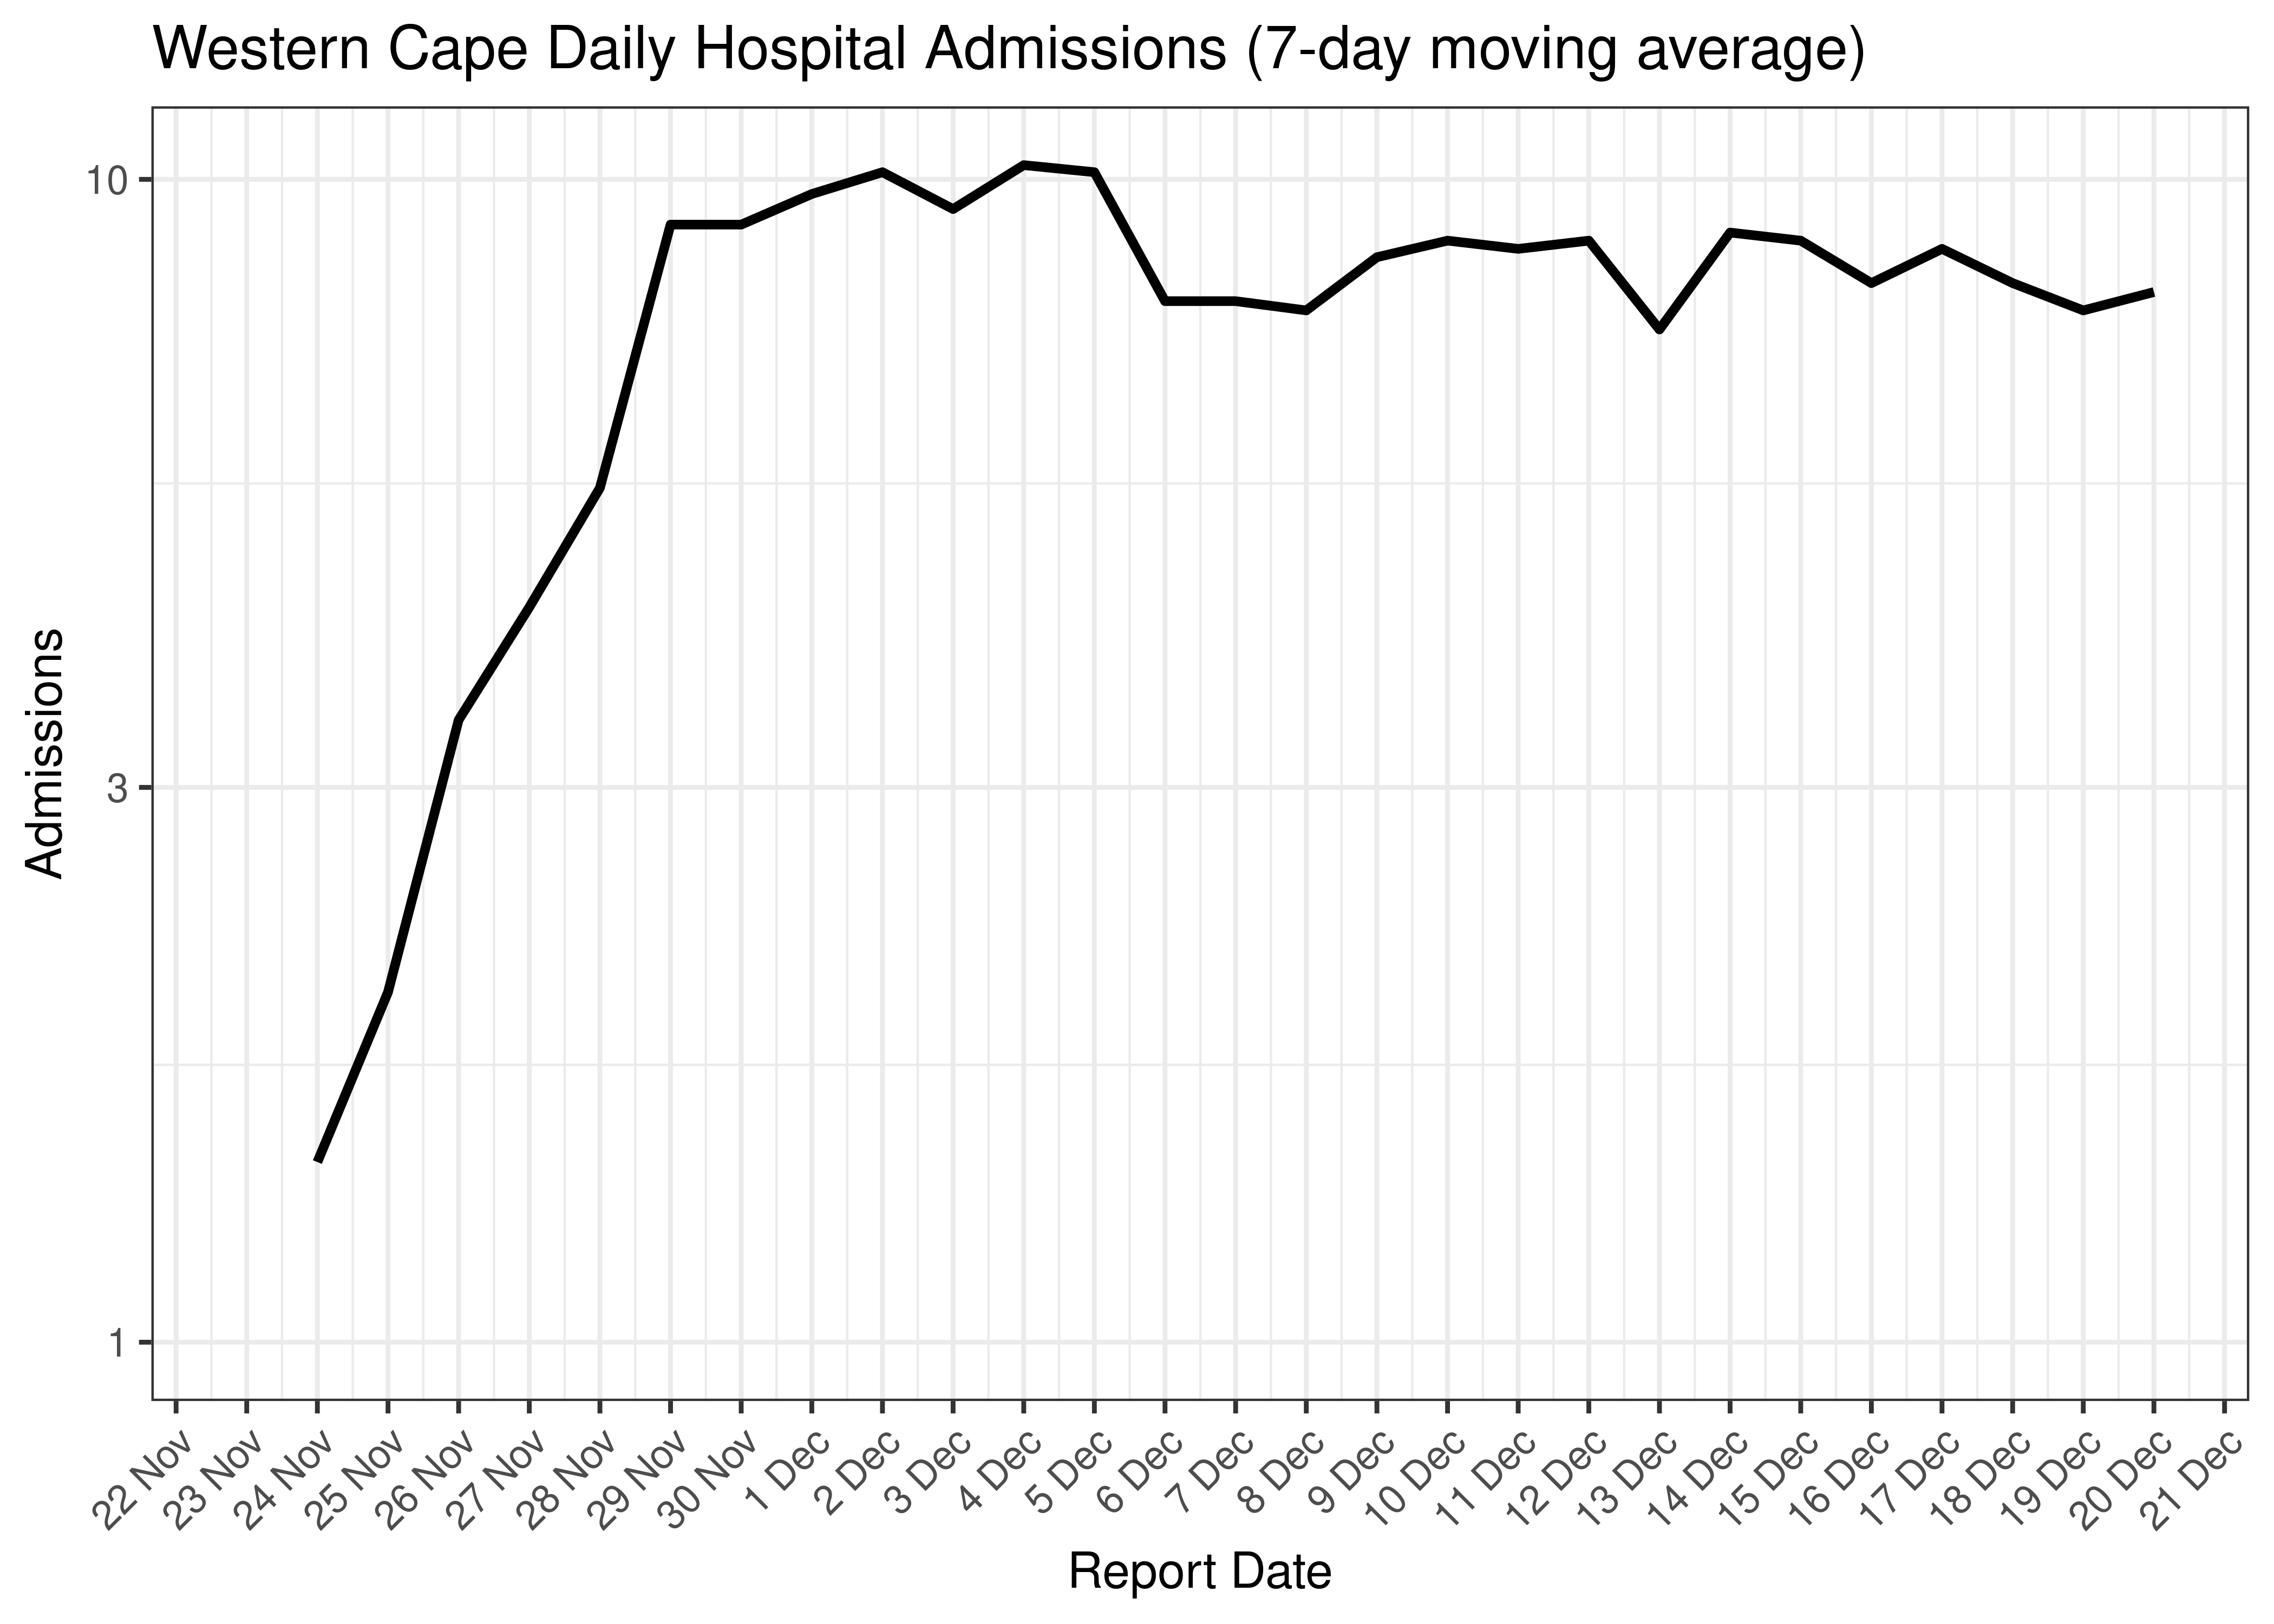 Western Cape Daily Hospital Admissions for Last 30-days (7-day moving average)